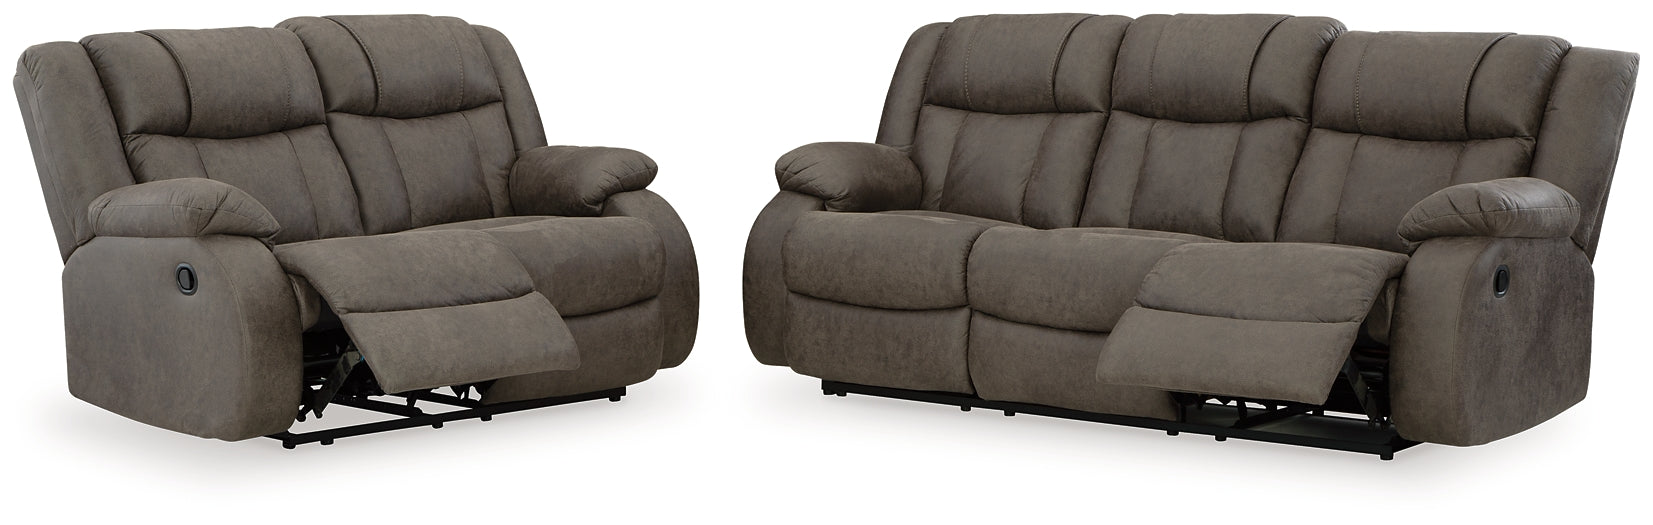 First Base Sofa and Loveseat